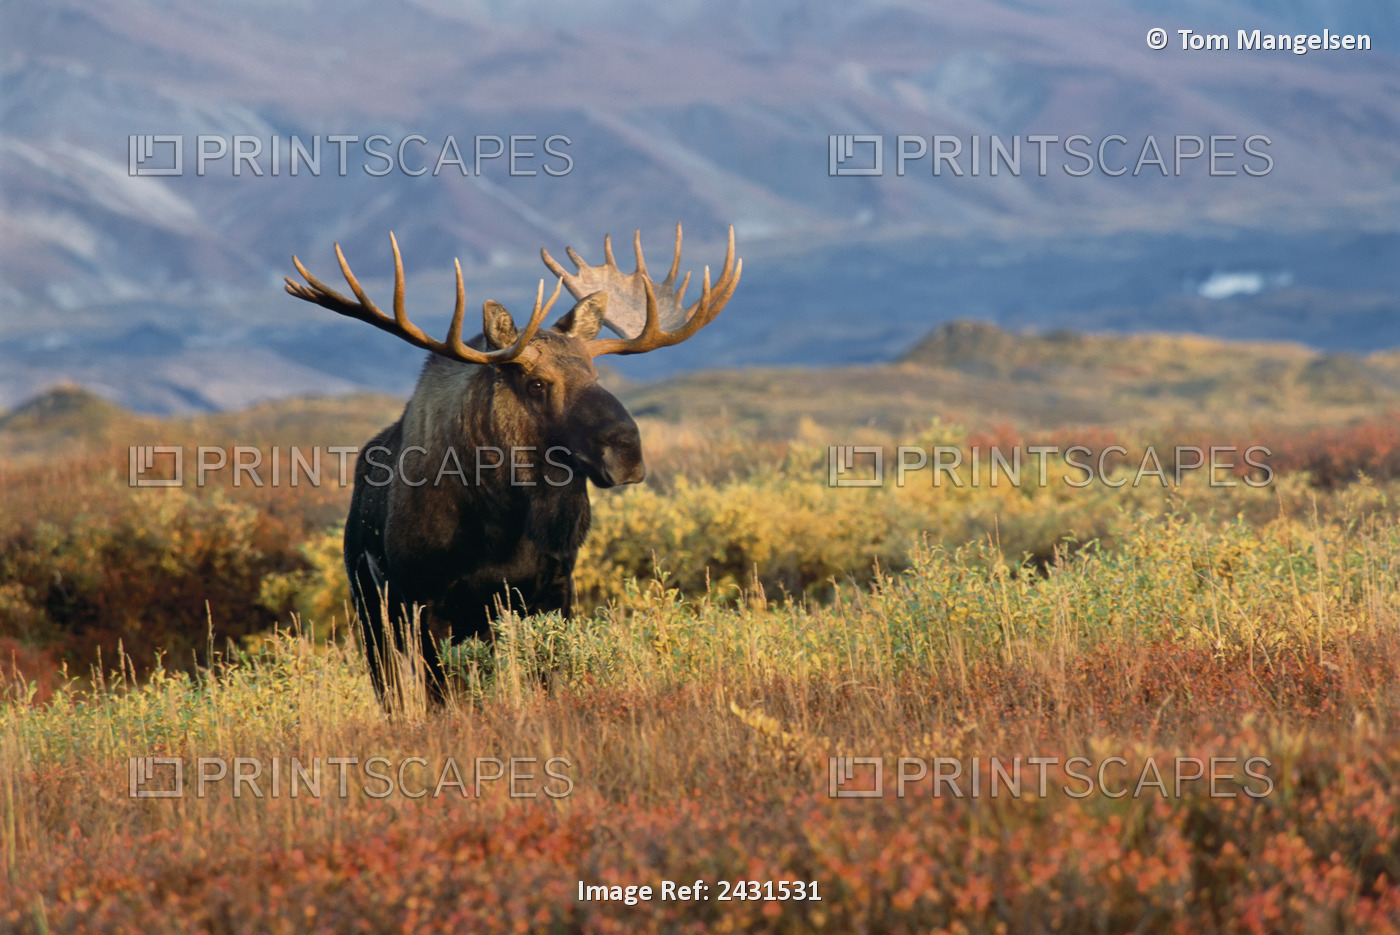 A Large Bull Moose Stands On The Tundra In Denali National Park, Alaska.